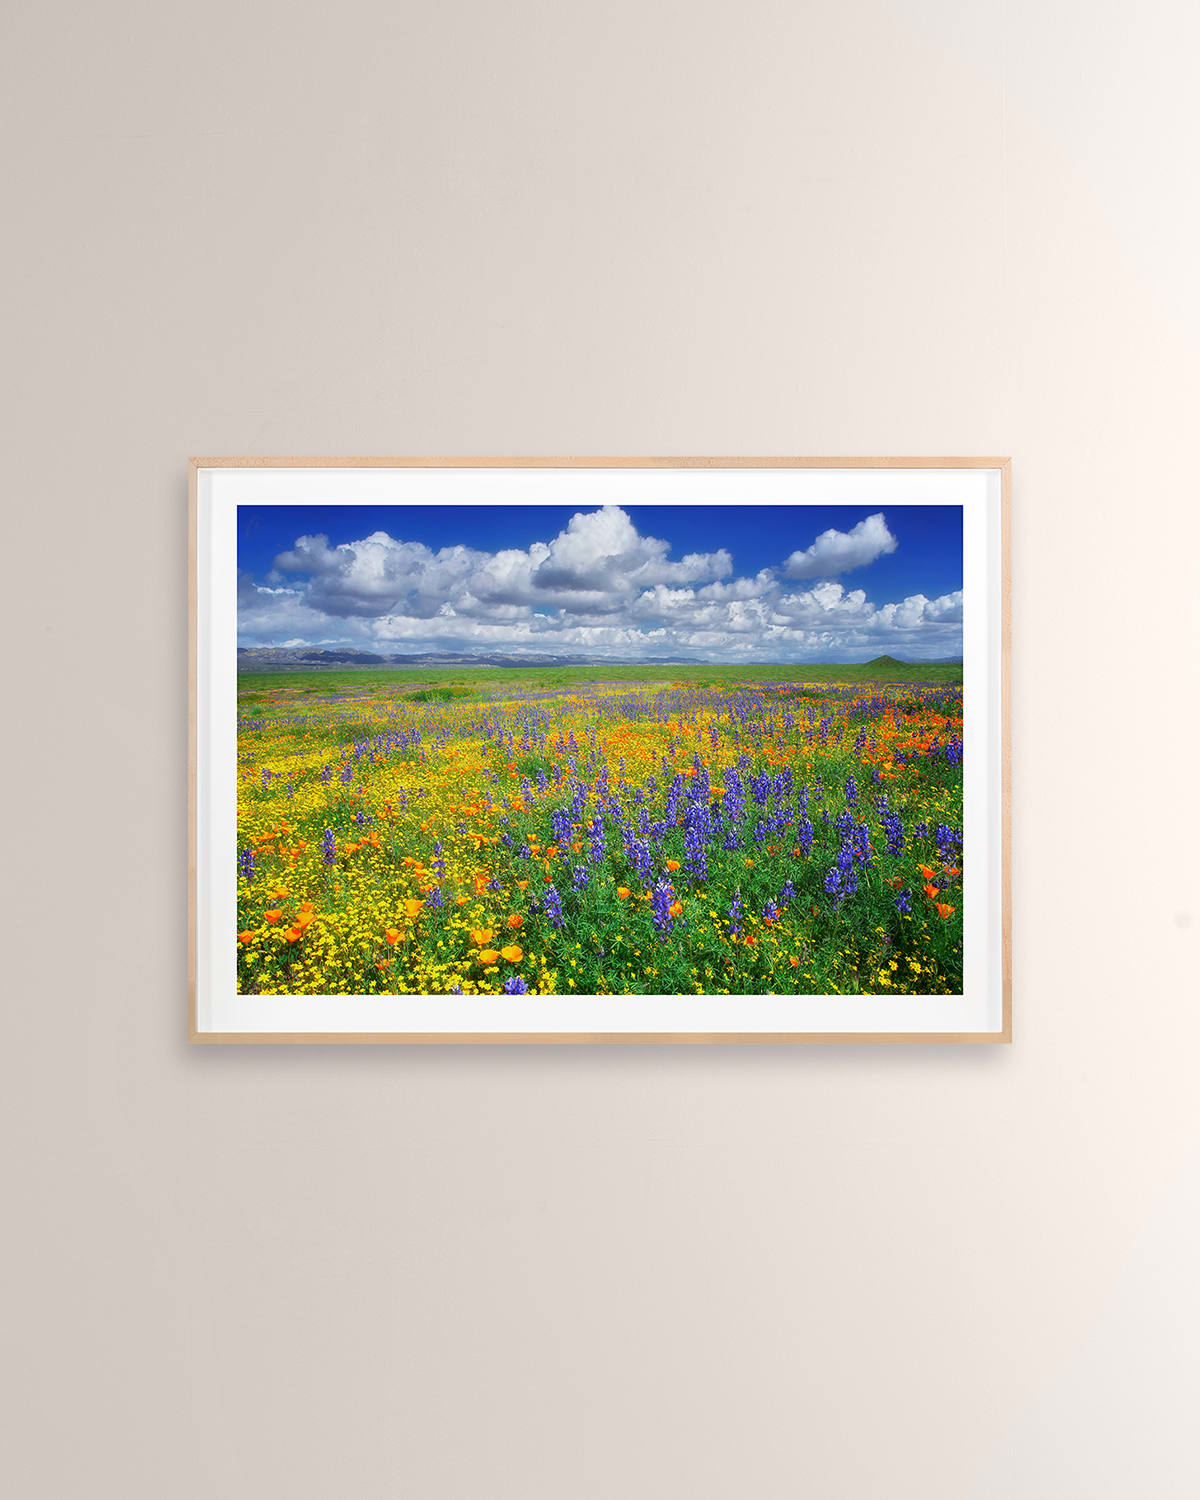 Grand Image Home Lupin And Poppies, Carrizo Plain National Monument Digital Art Print By Photodf In Maple